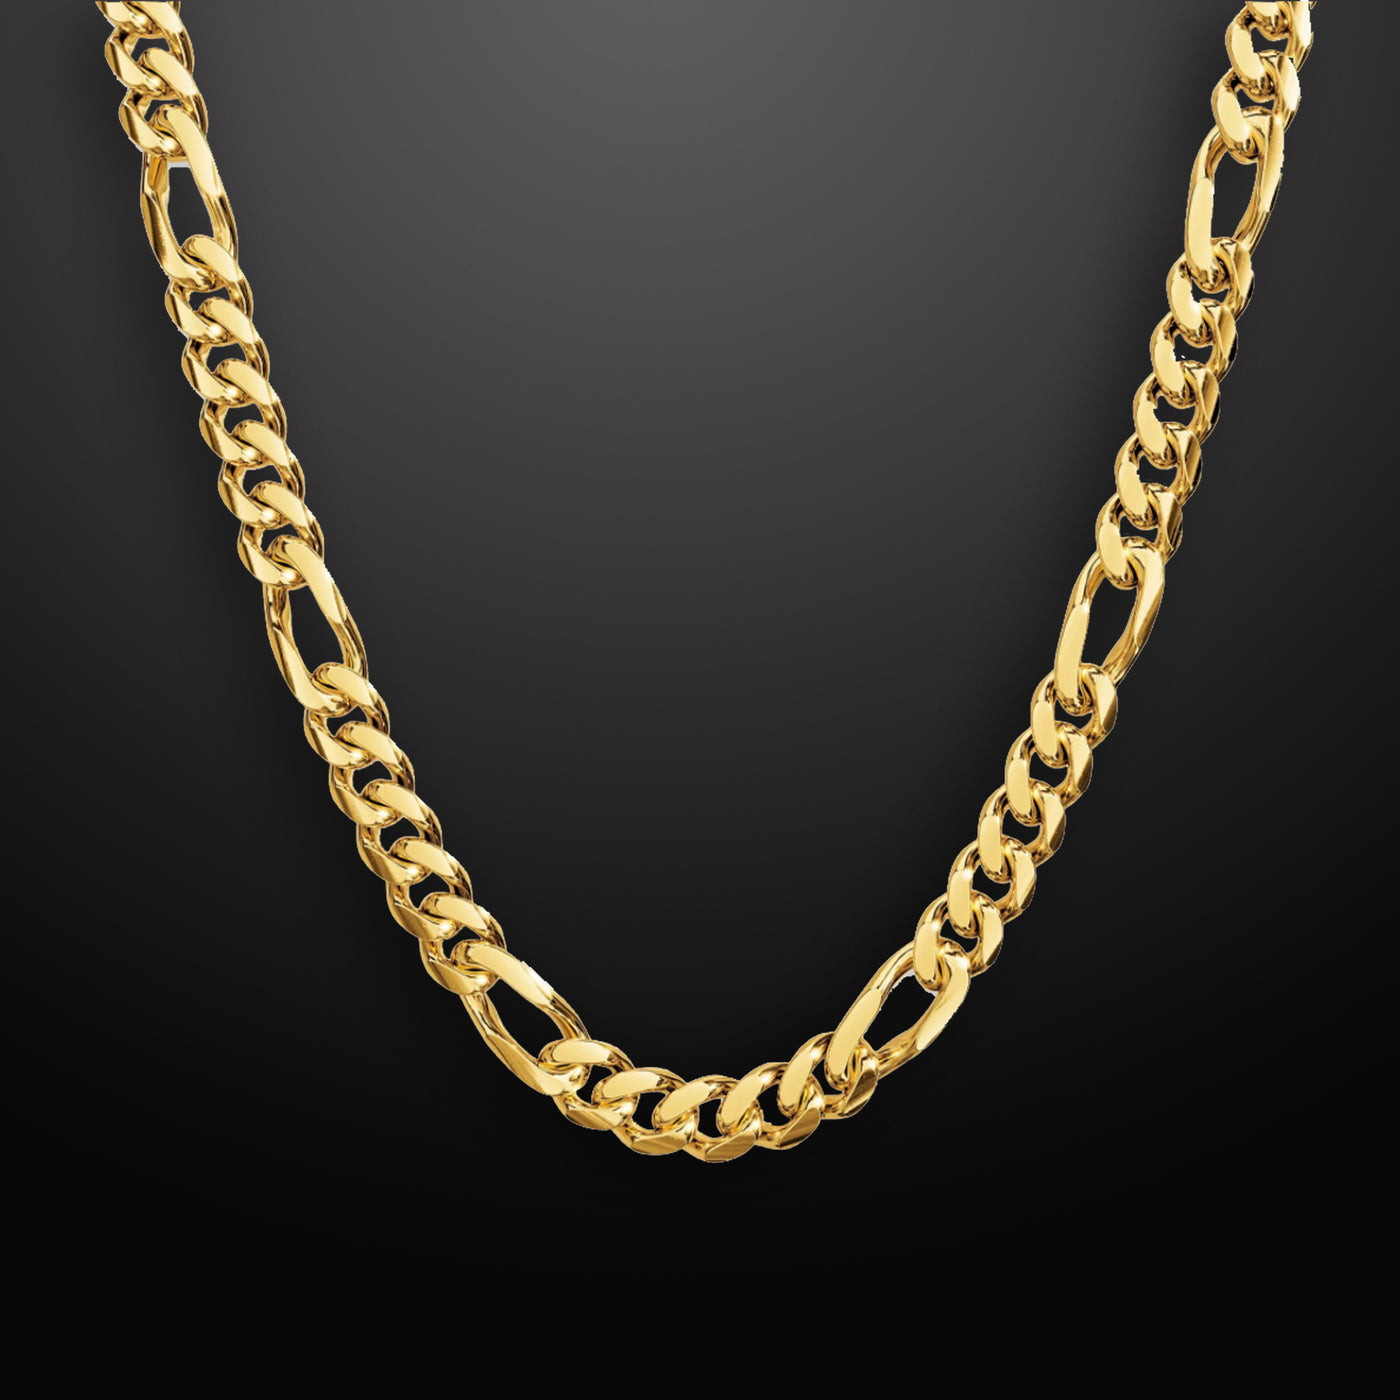 Modern Link Chain Necklace Gold - 8mm